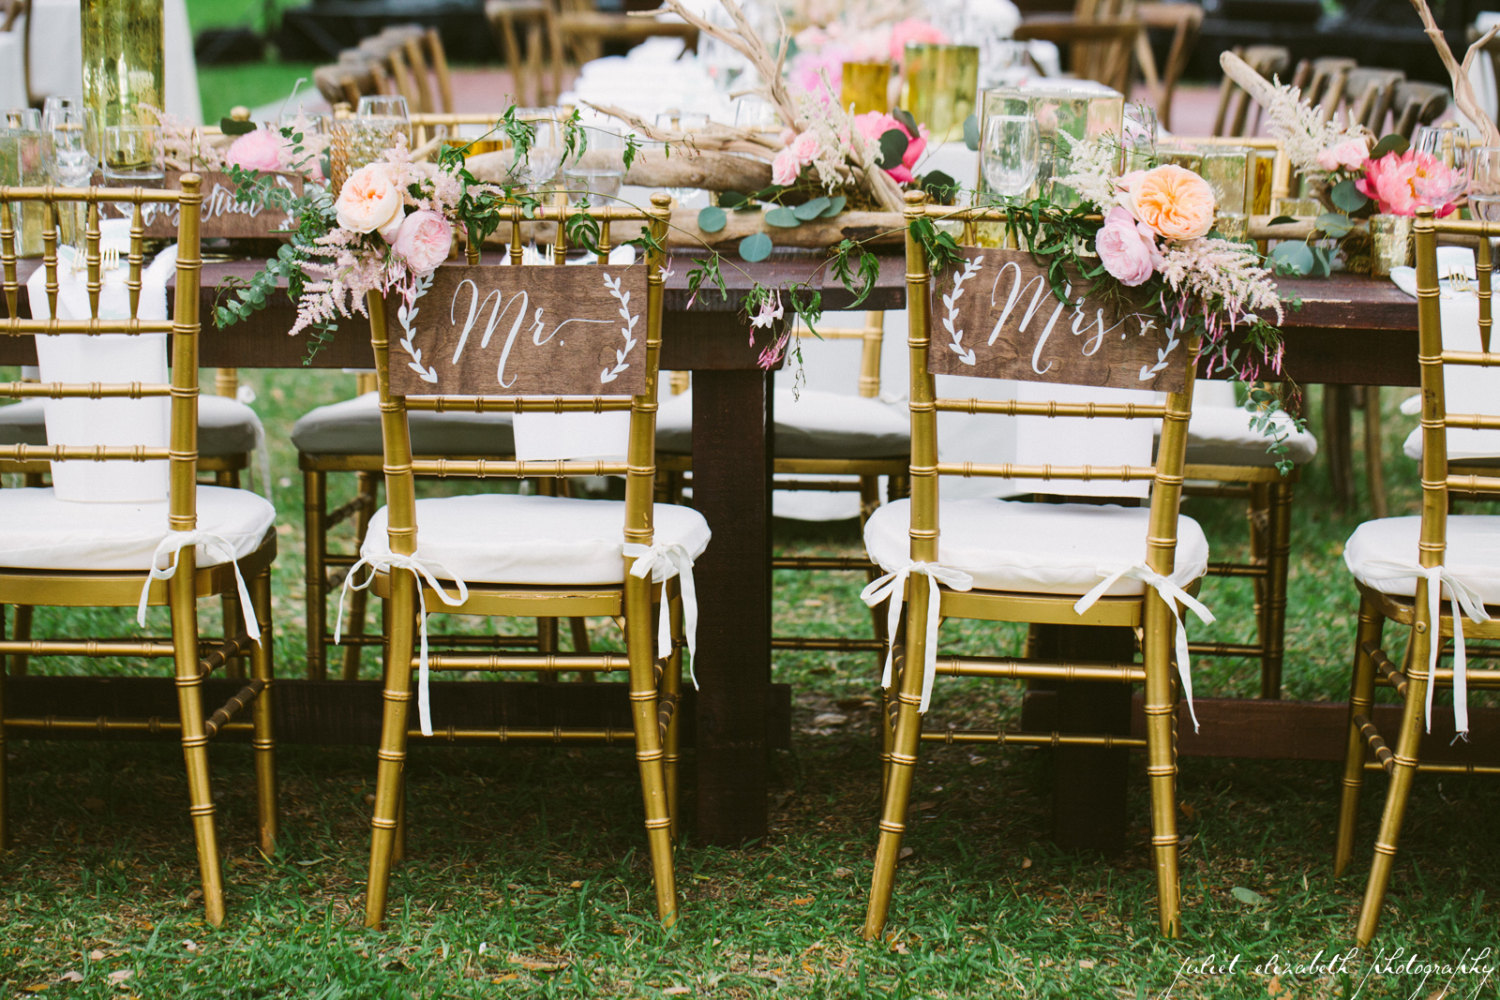 cute wooden chair signs | via bride and groom chair signs https://emmalinebride.com/decor/bride-and-groom-chairs/